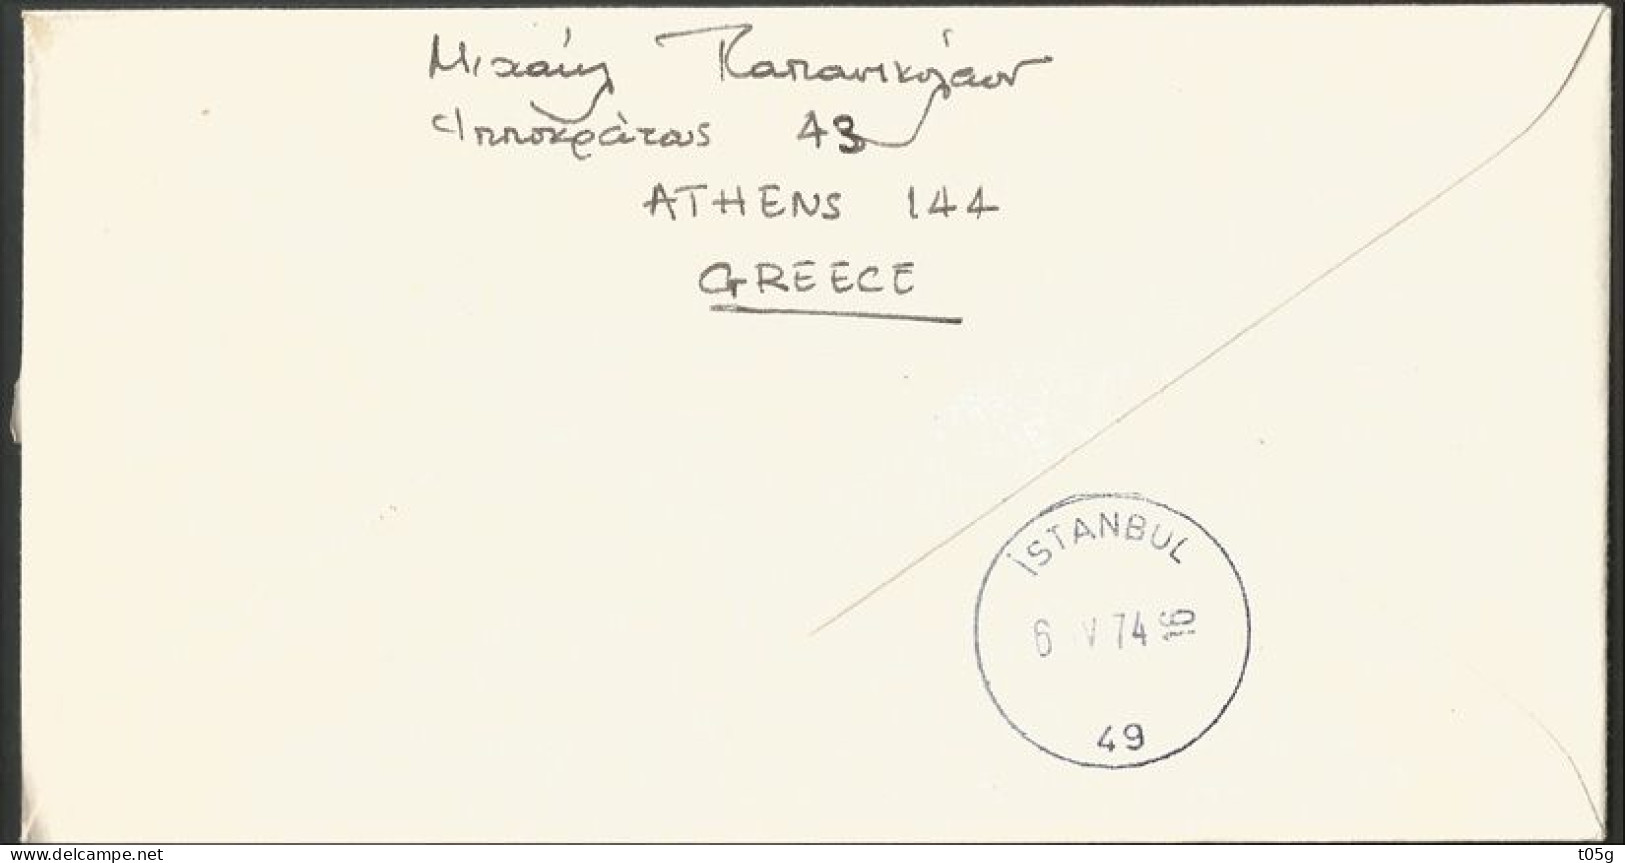 First Flight GREECE- GRECE- HELLAS: 6-4-1974  Cover Thessaloniki-Istambul AUSTRIAN AIRLINES - Covers & Documents